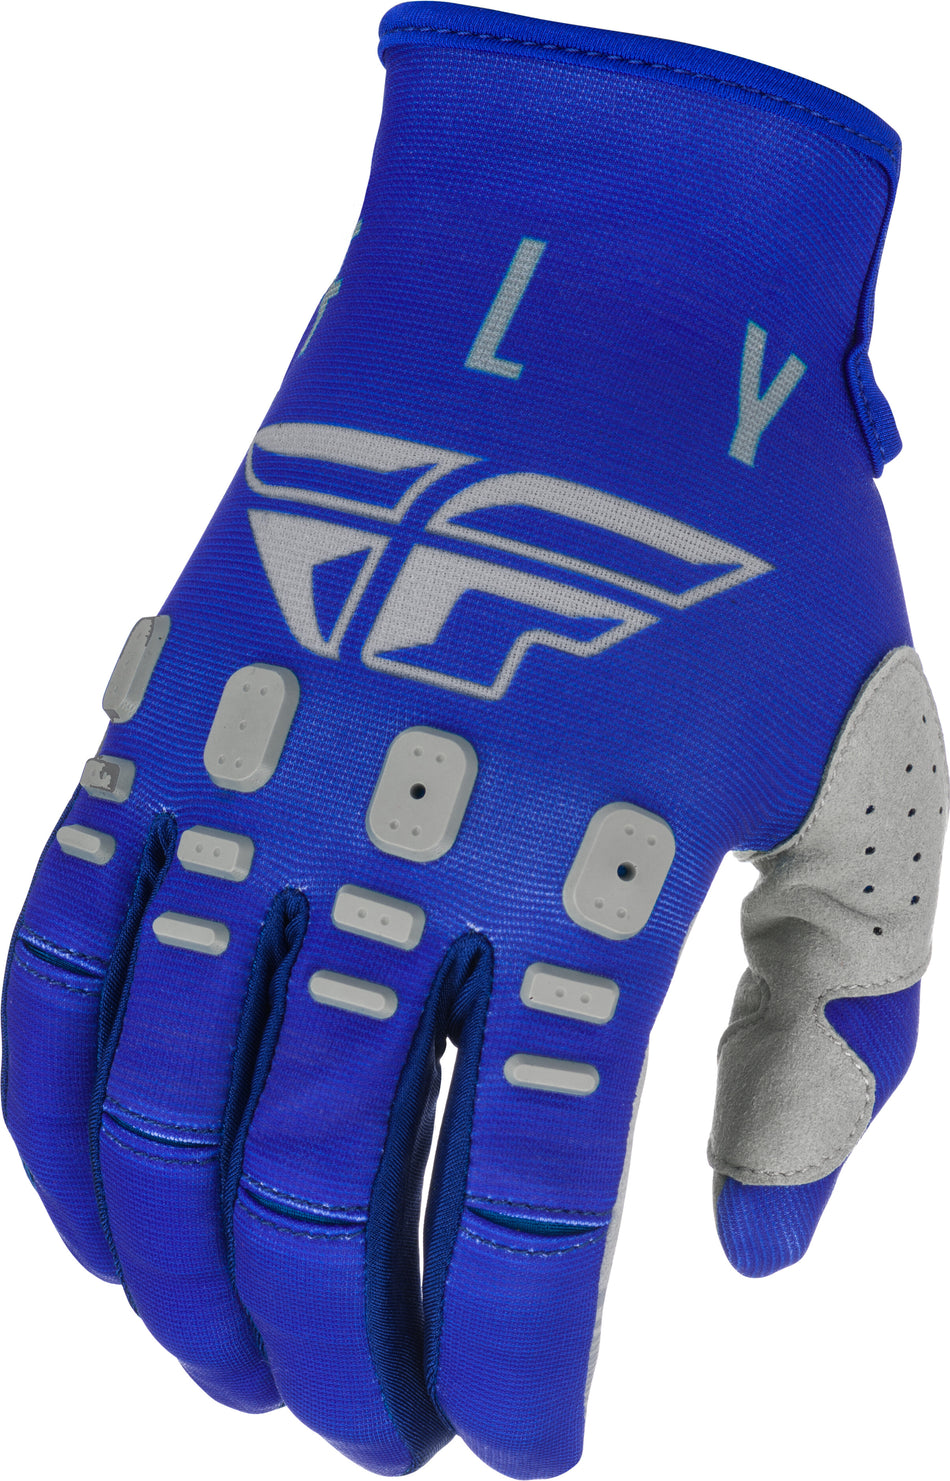 FLY RACING Youth Kinetic K121 Gloves Blue/Navy/Grey Sz 05 374-41105